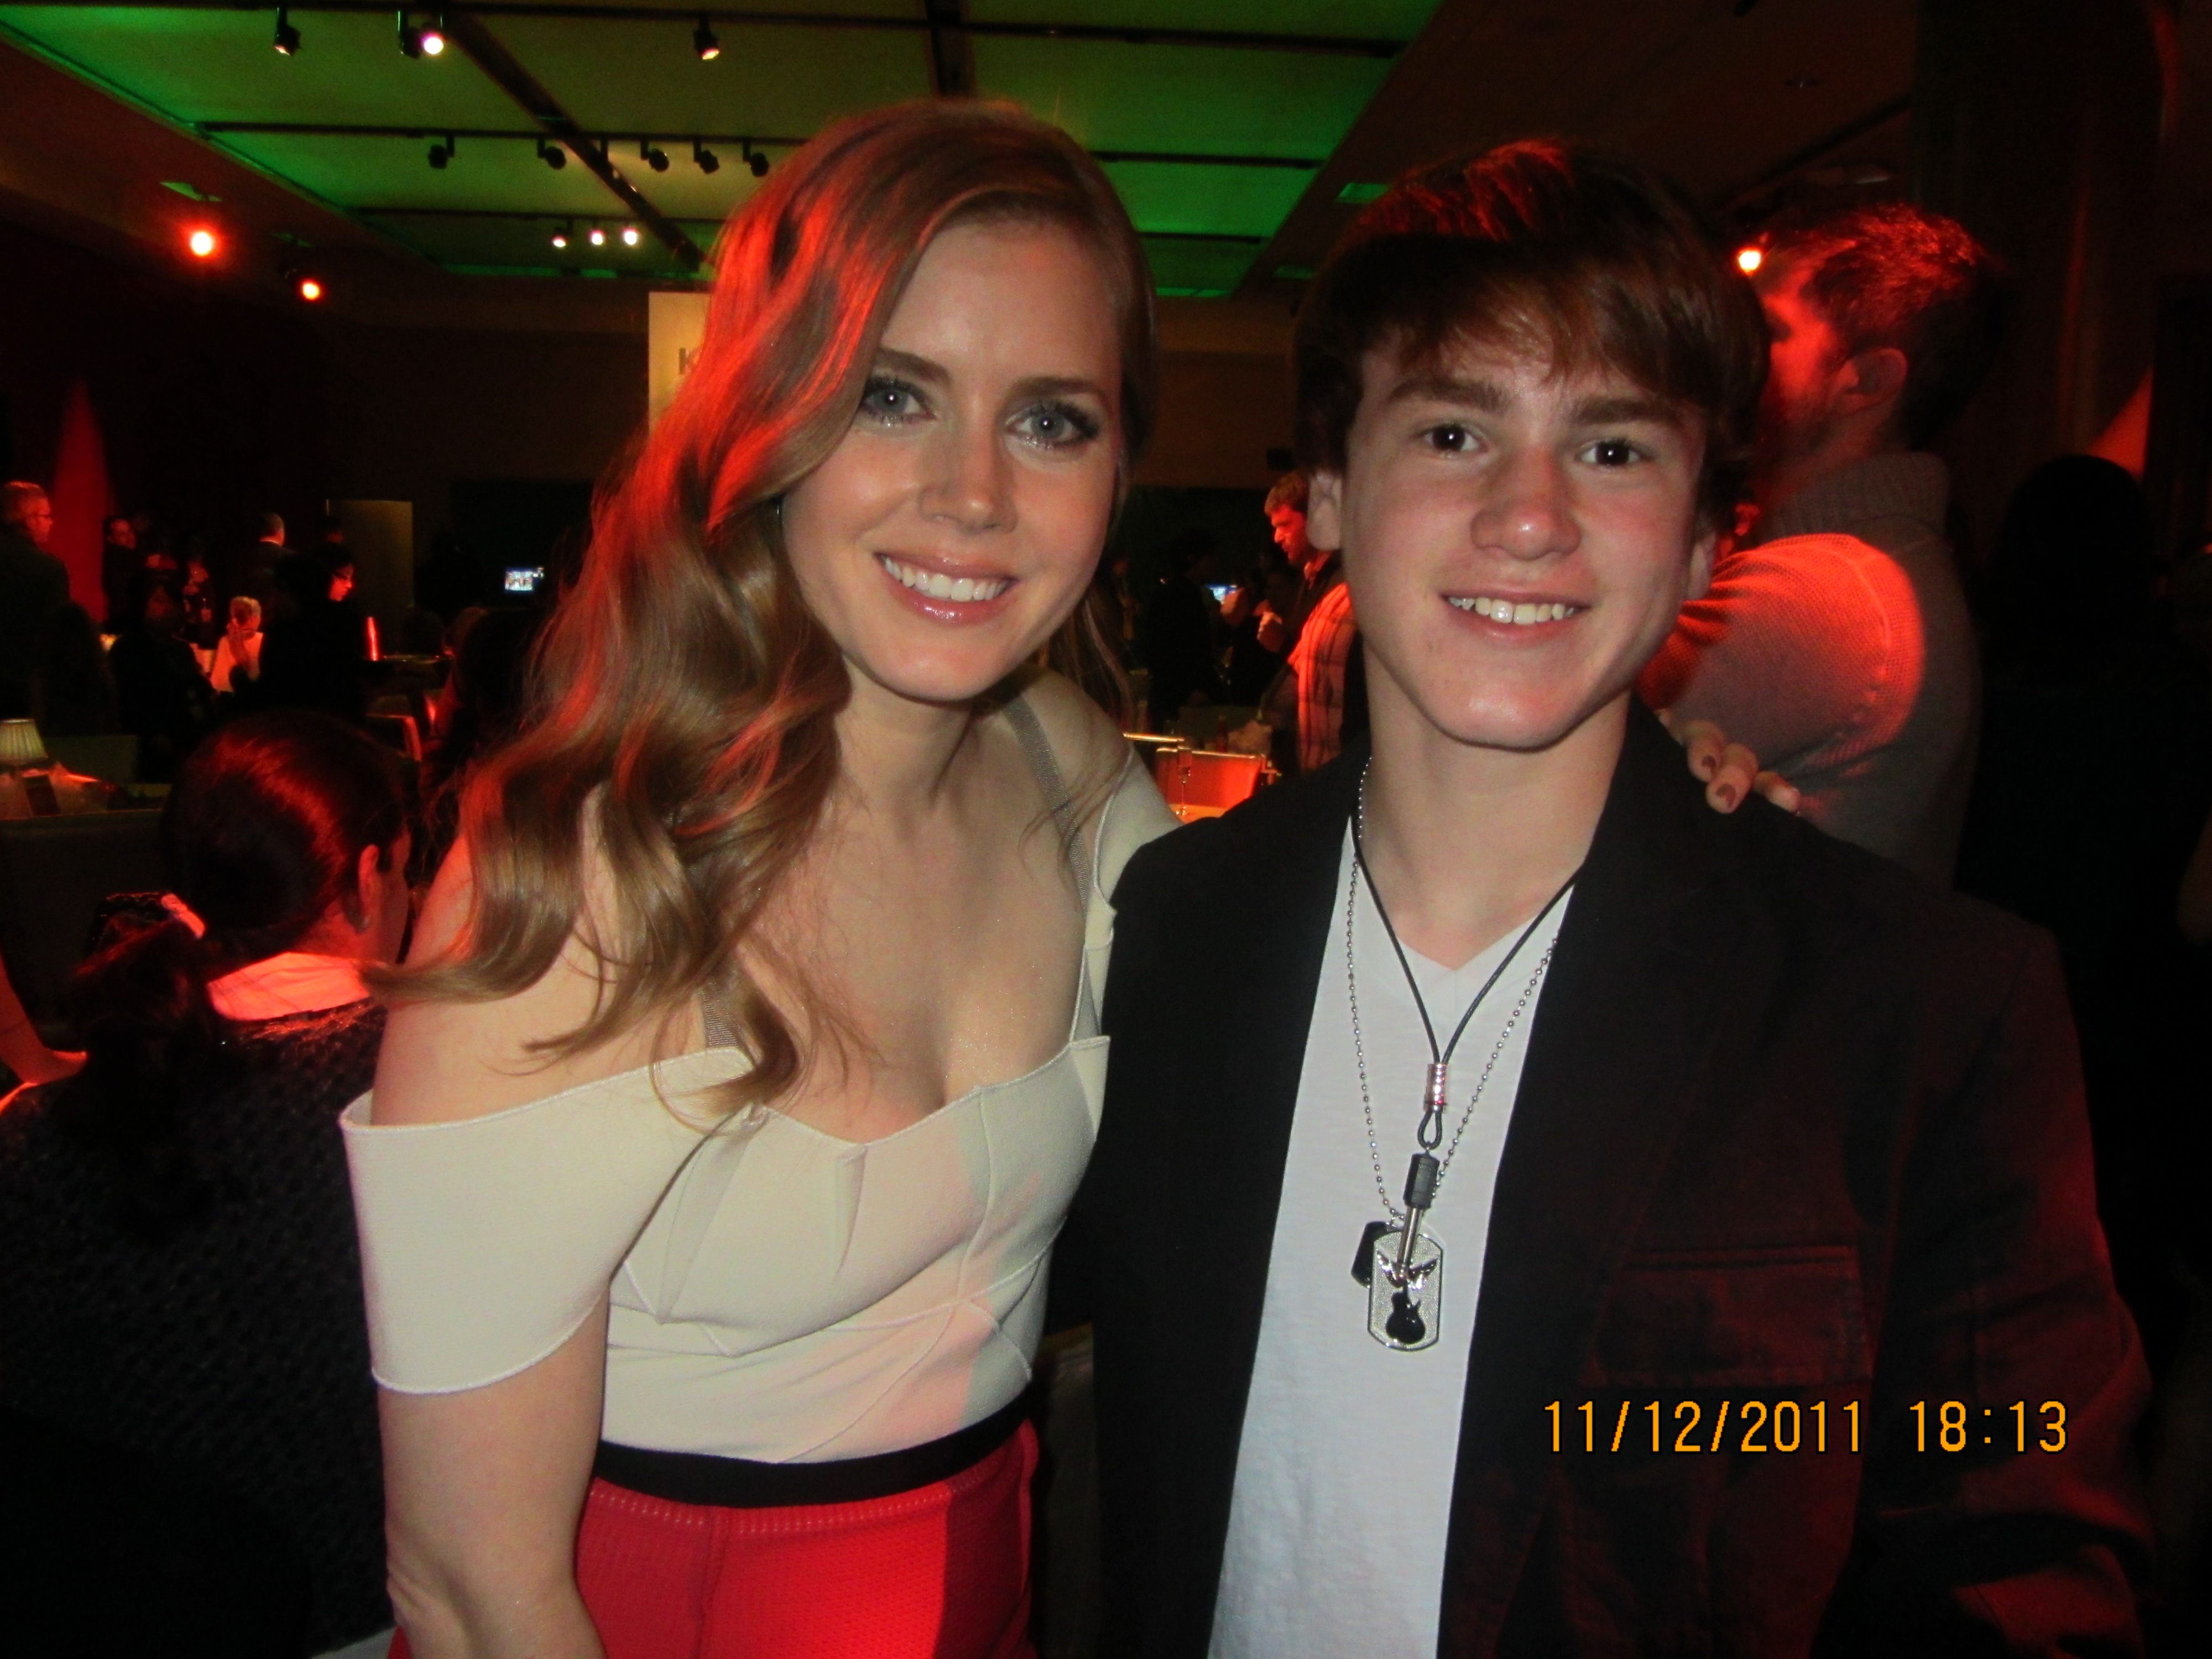 Justin Tinucci with Amy Adams at the premiere of The Muppets November 12 2011 at the El Capitan Theatre, Hollywood.